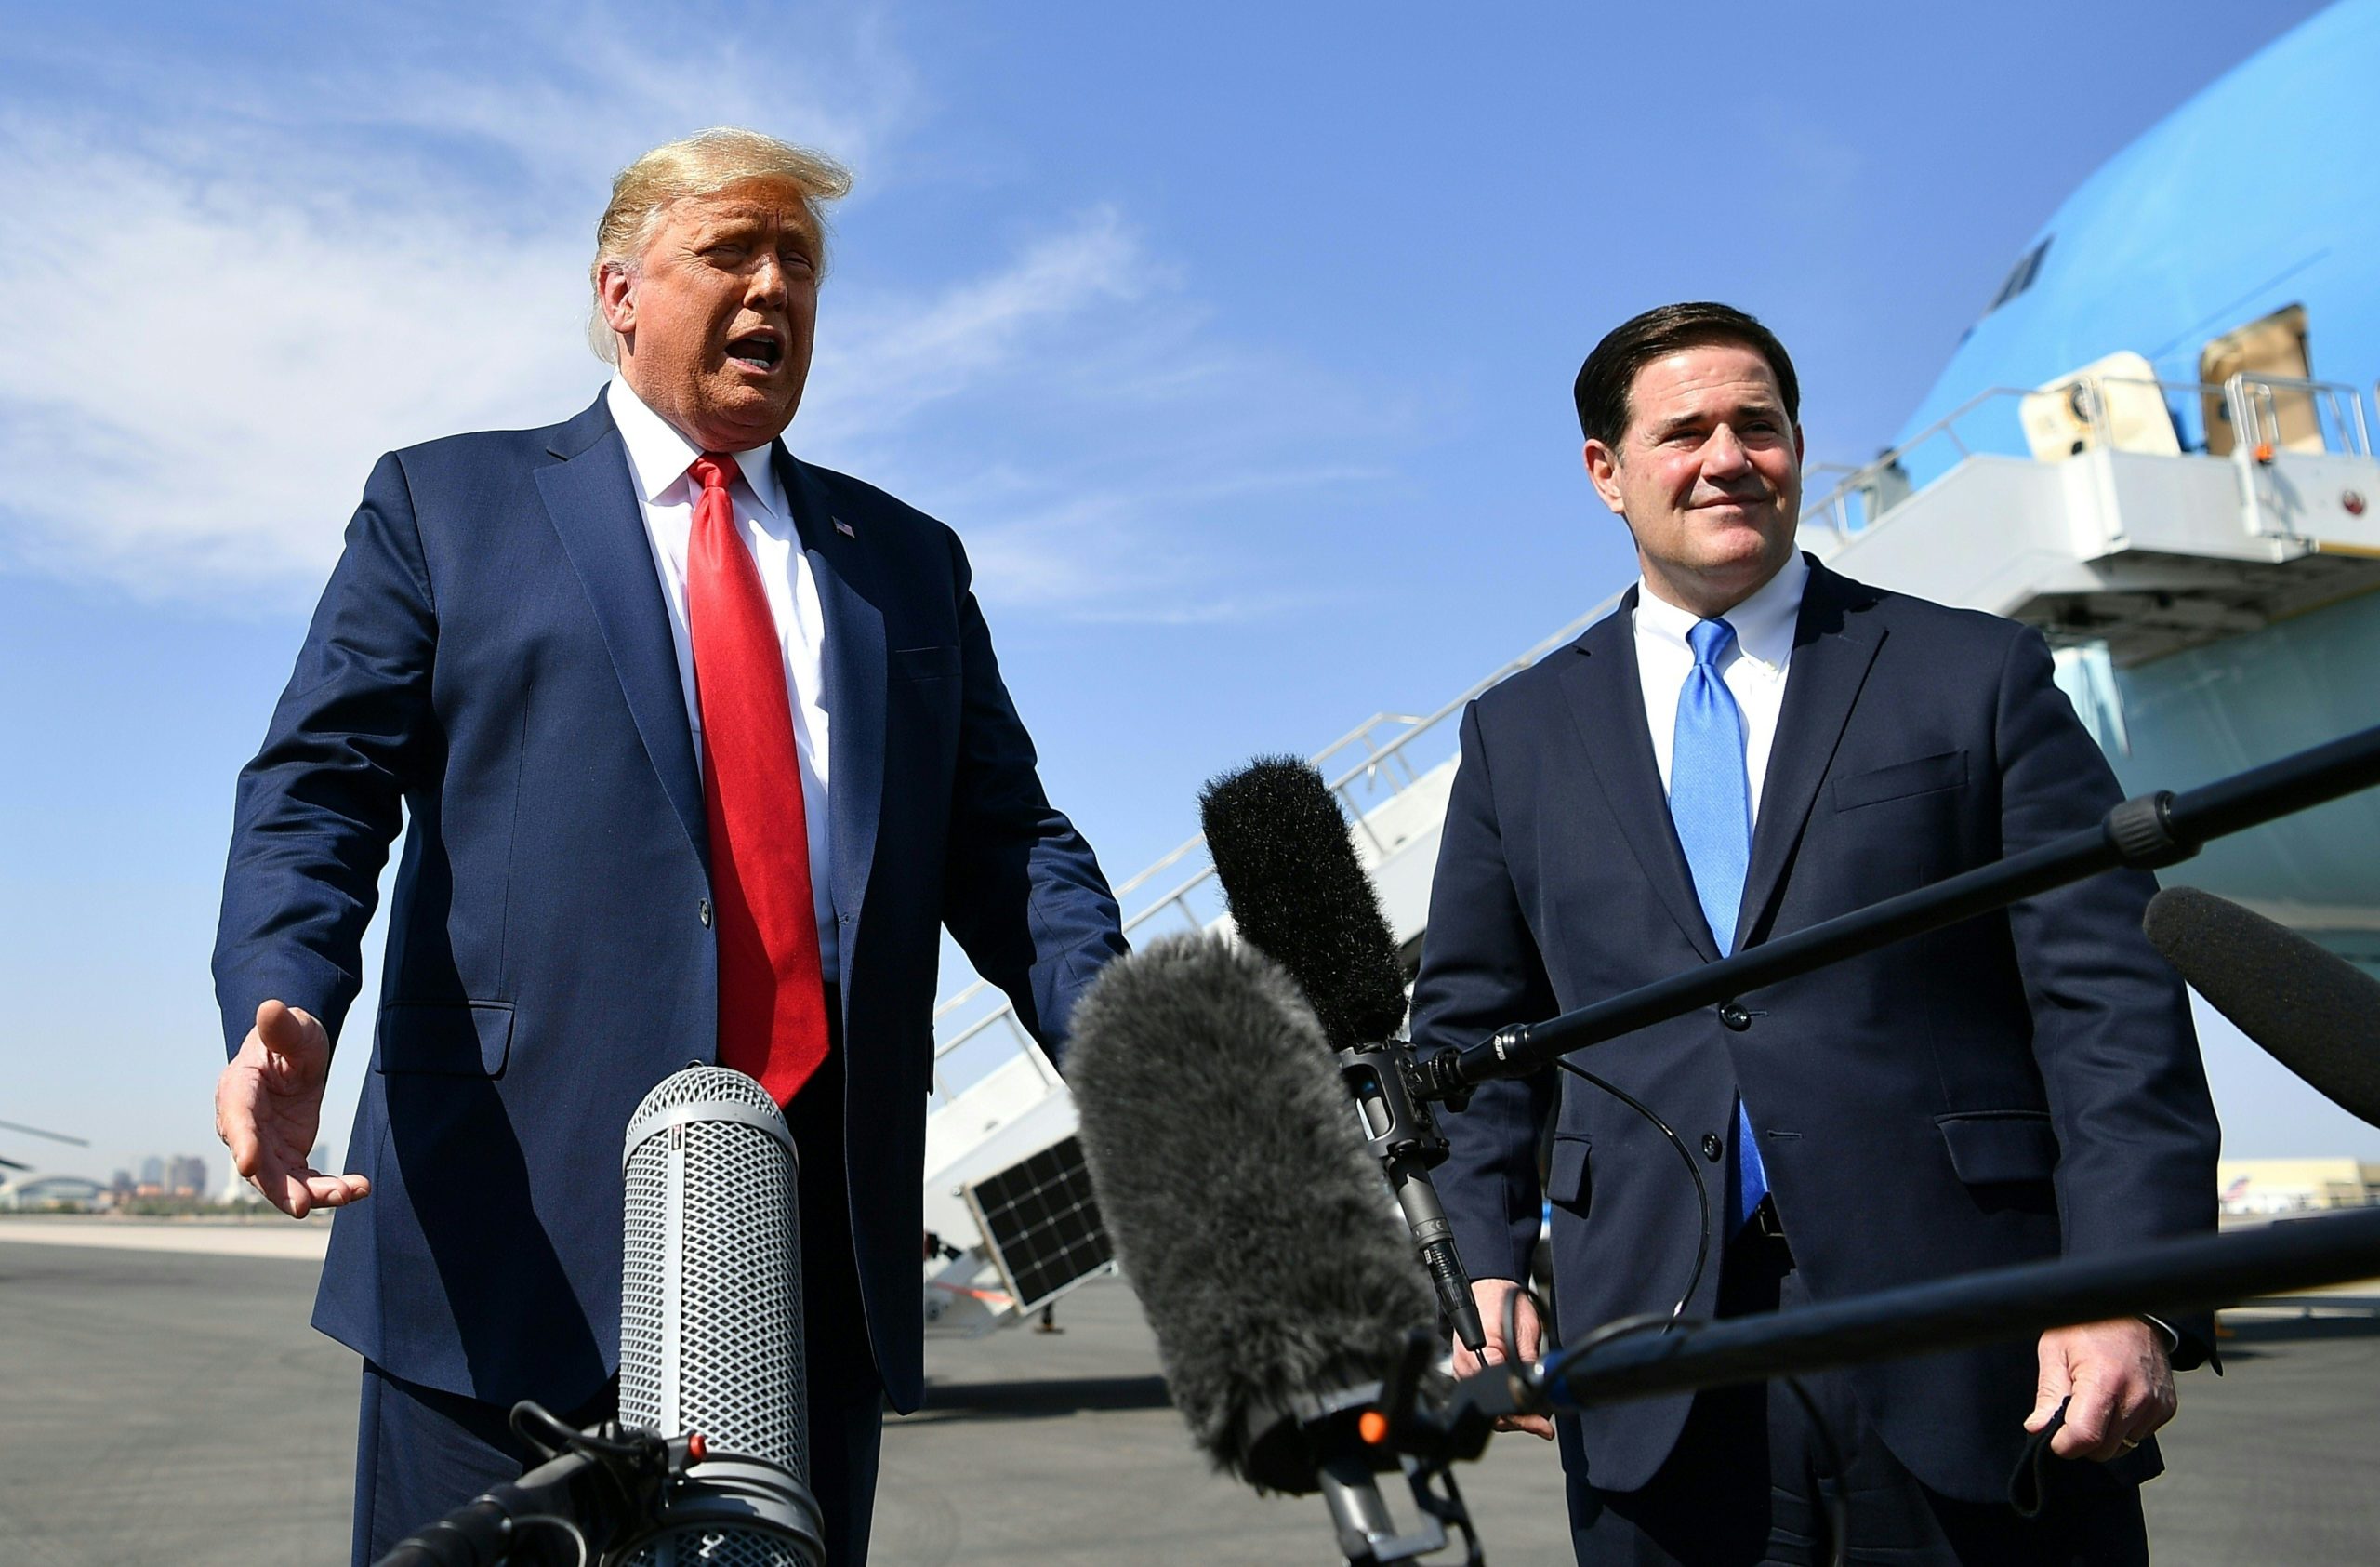 US President Donald Trump speaks to members of the media as Governor of Arizona Doug Ducey (R) looks on, upon arrival at Phoenix Sky Harbor International Airport in Phoenix, Arizona on October 19, 2020. Trump is heading to Prescott, Arizona for a campaign rally. - US President Donald Trump went after top government scientist Anthony Fauci in a call with campaign staffers on October 19, 2020, suggesting the hugely respected and popular doctor was an "idiot." (Photo by MANDEL NGAN / AFP) (Photo by MANDEL NGAN/AFP via Getty Images)